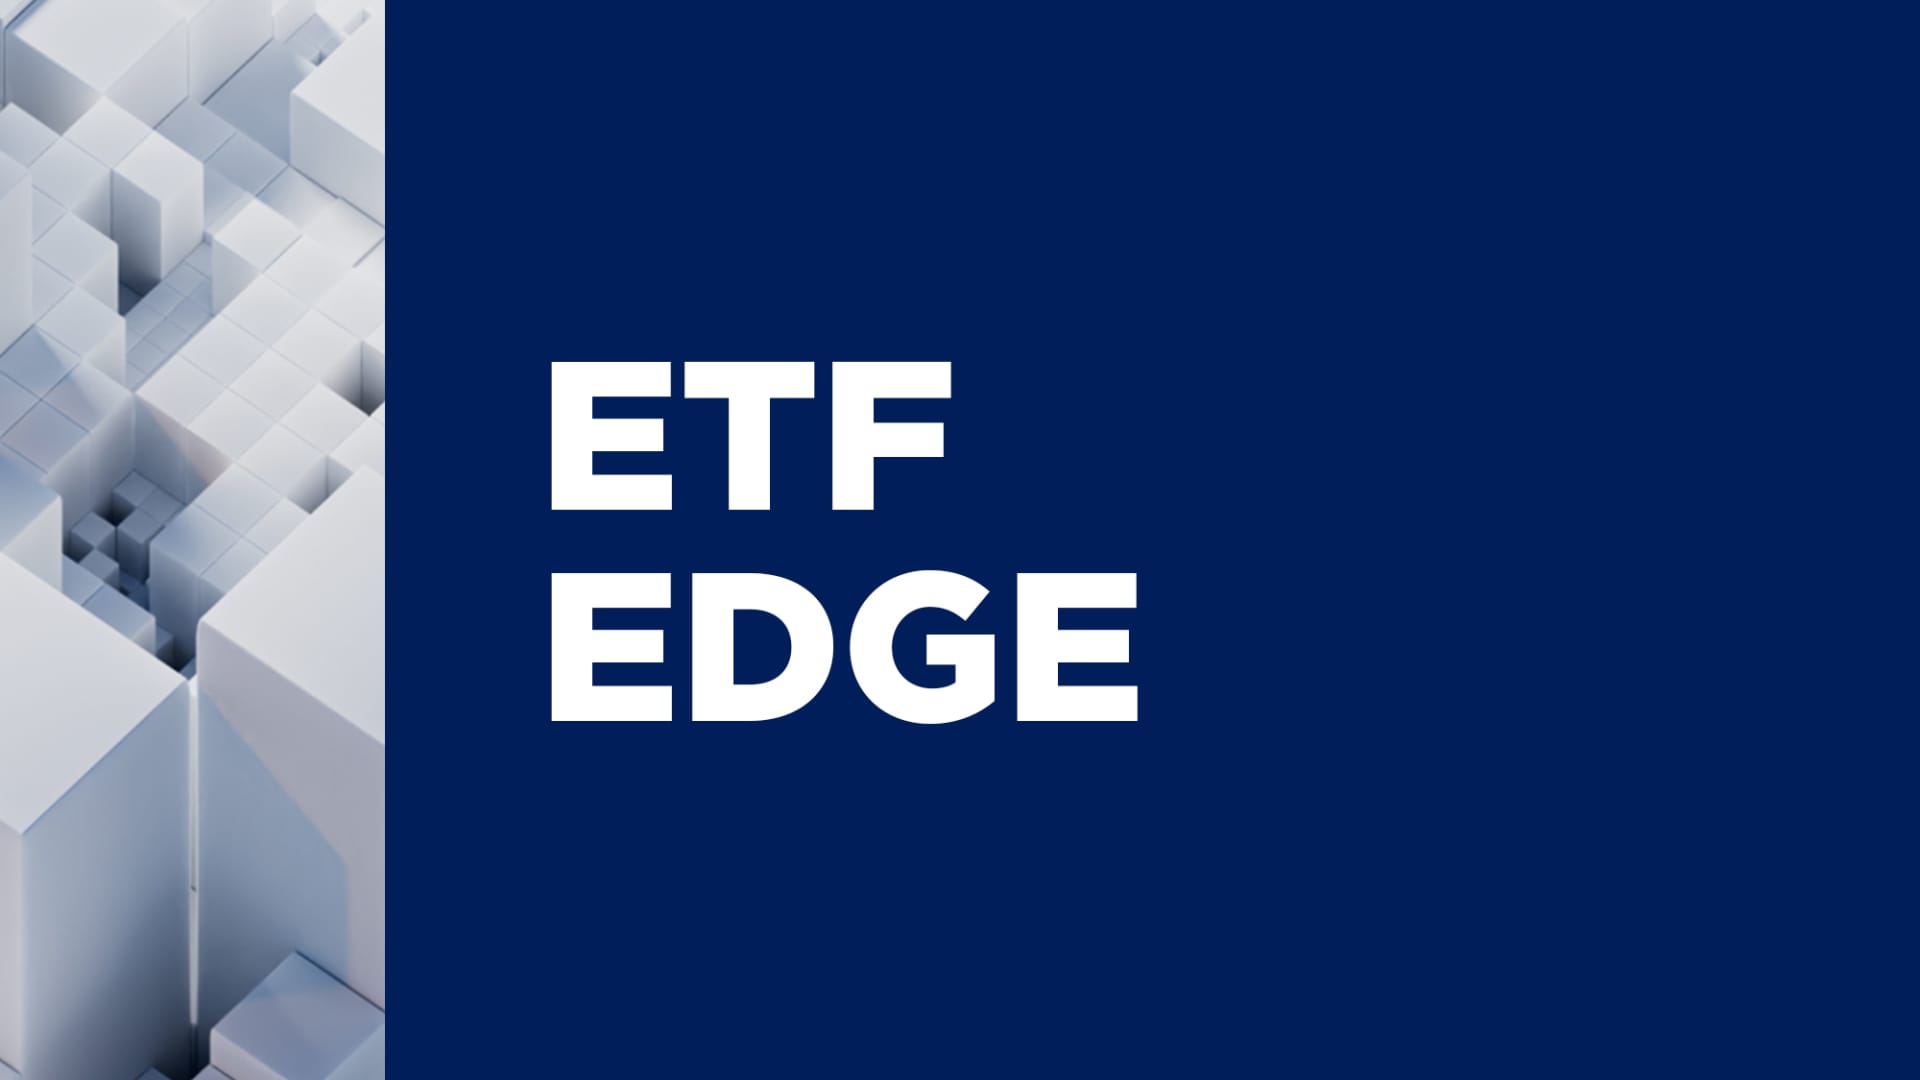 ETF Edge on reshoring trends, weight loss drugs and more [Video]